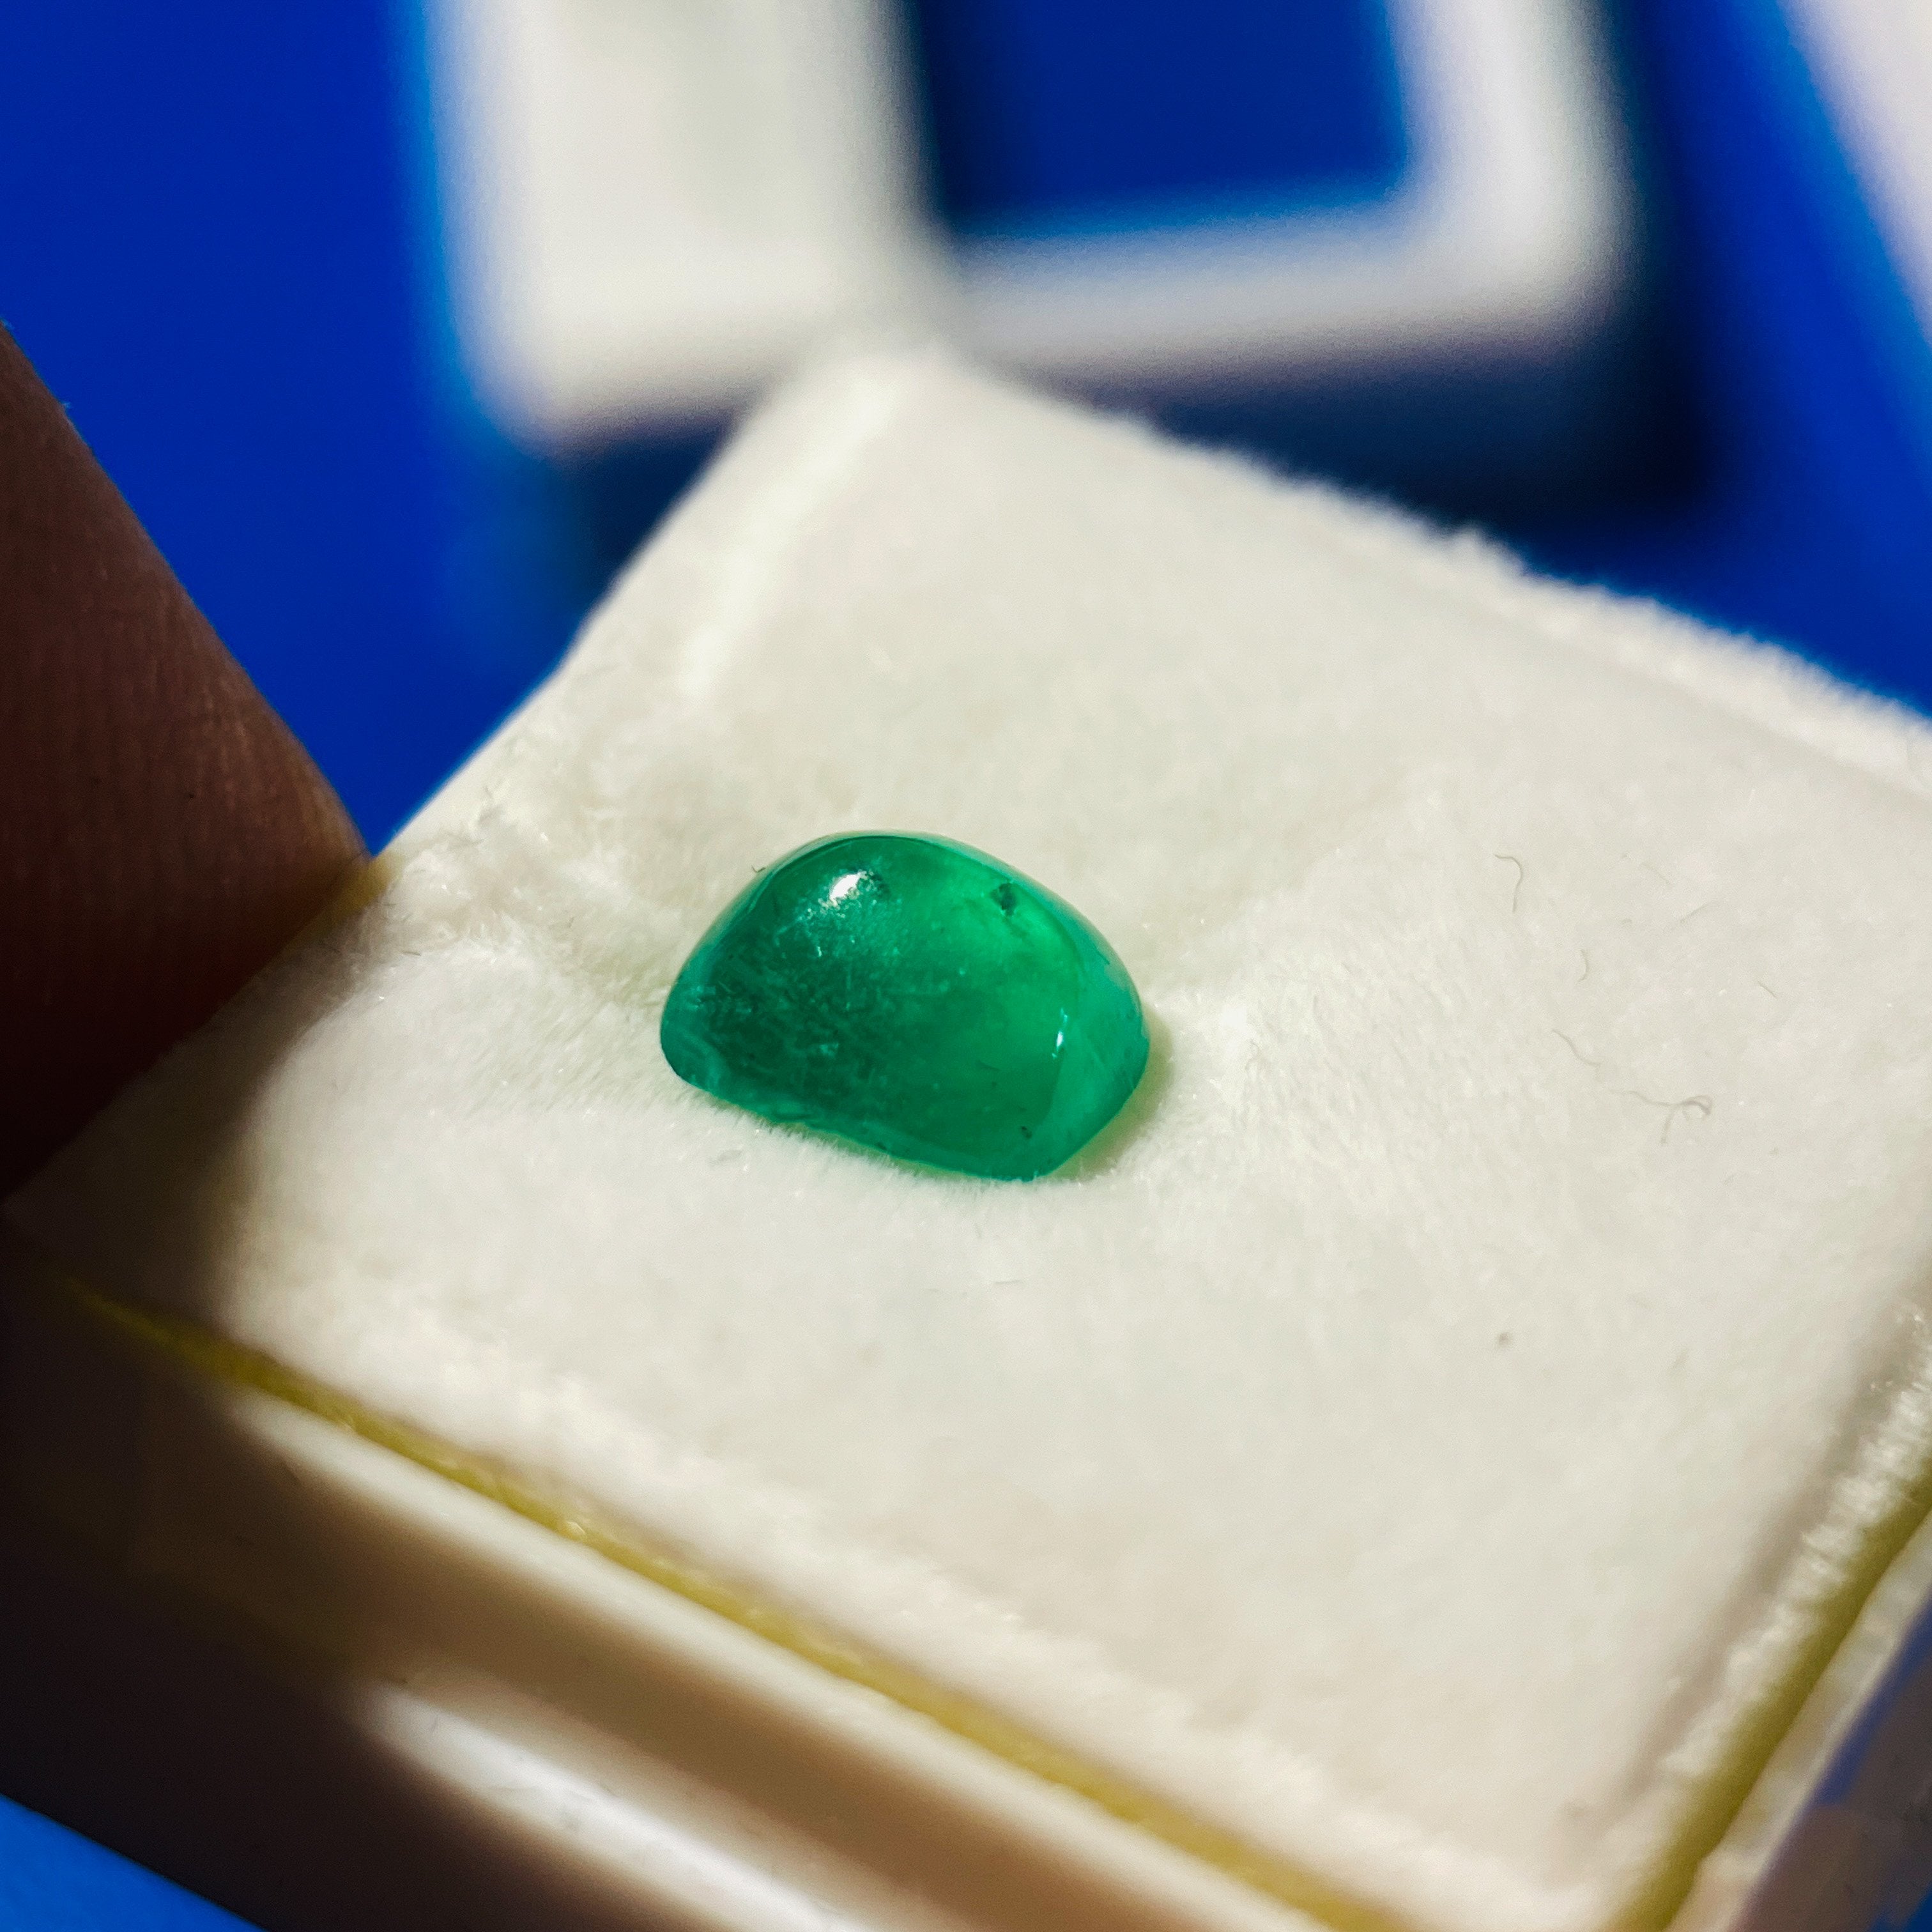 1.05Ct Emerald Tanzania No Oil Added But Some Labs May Describe The Stone As Minor Oil Or